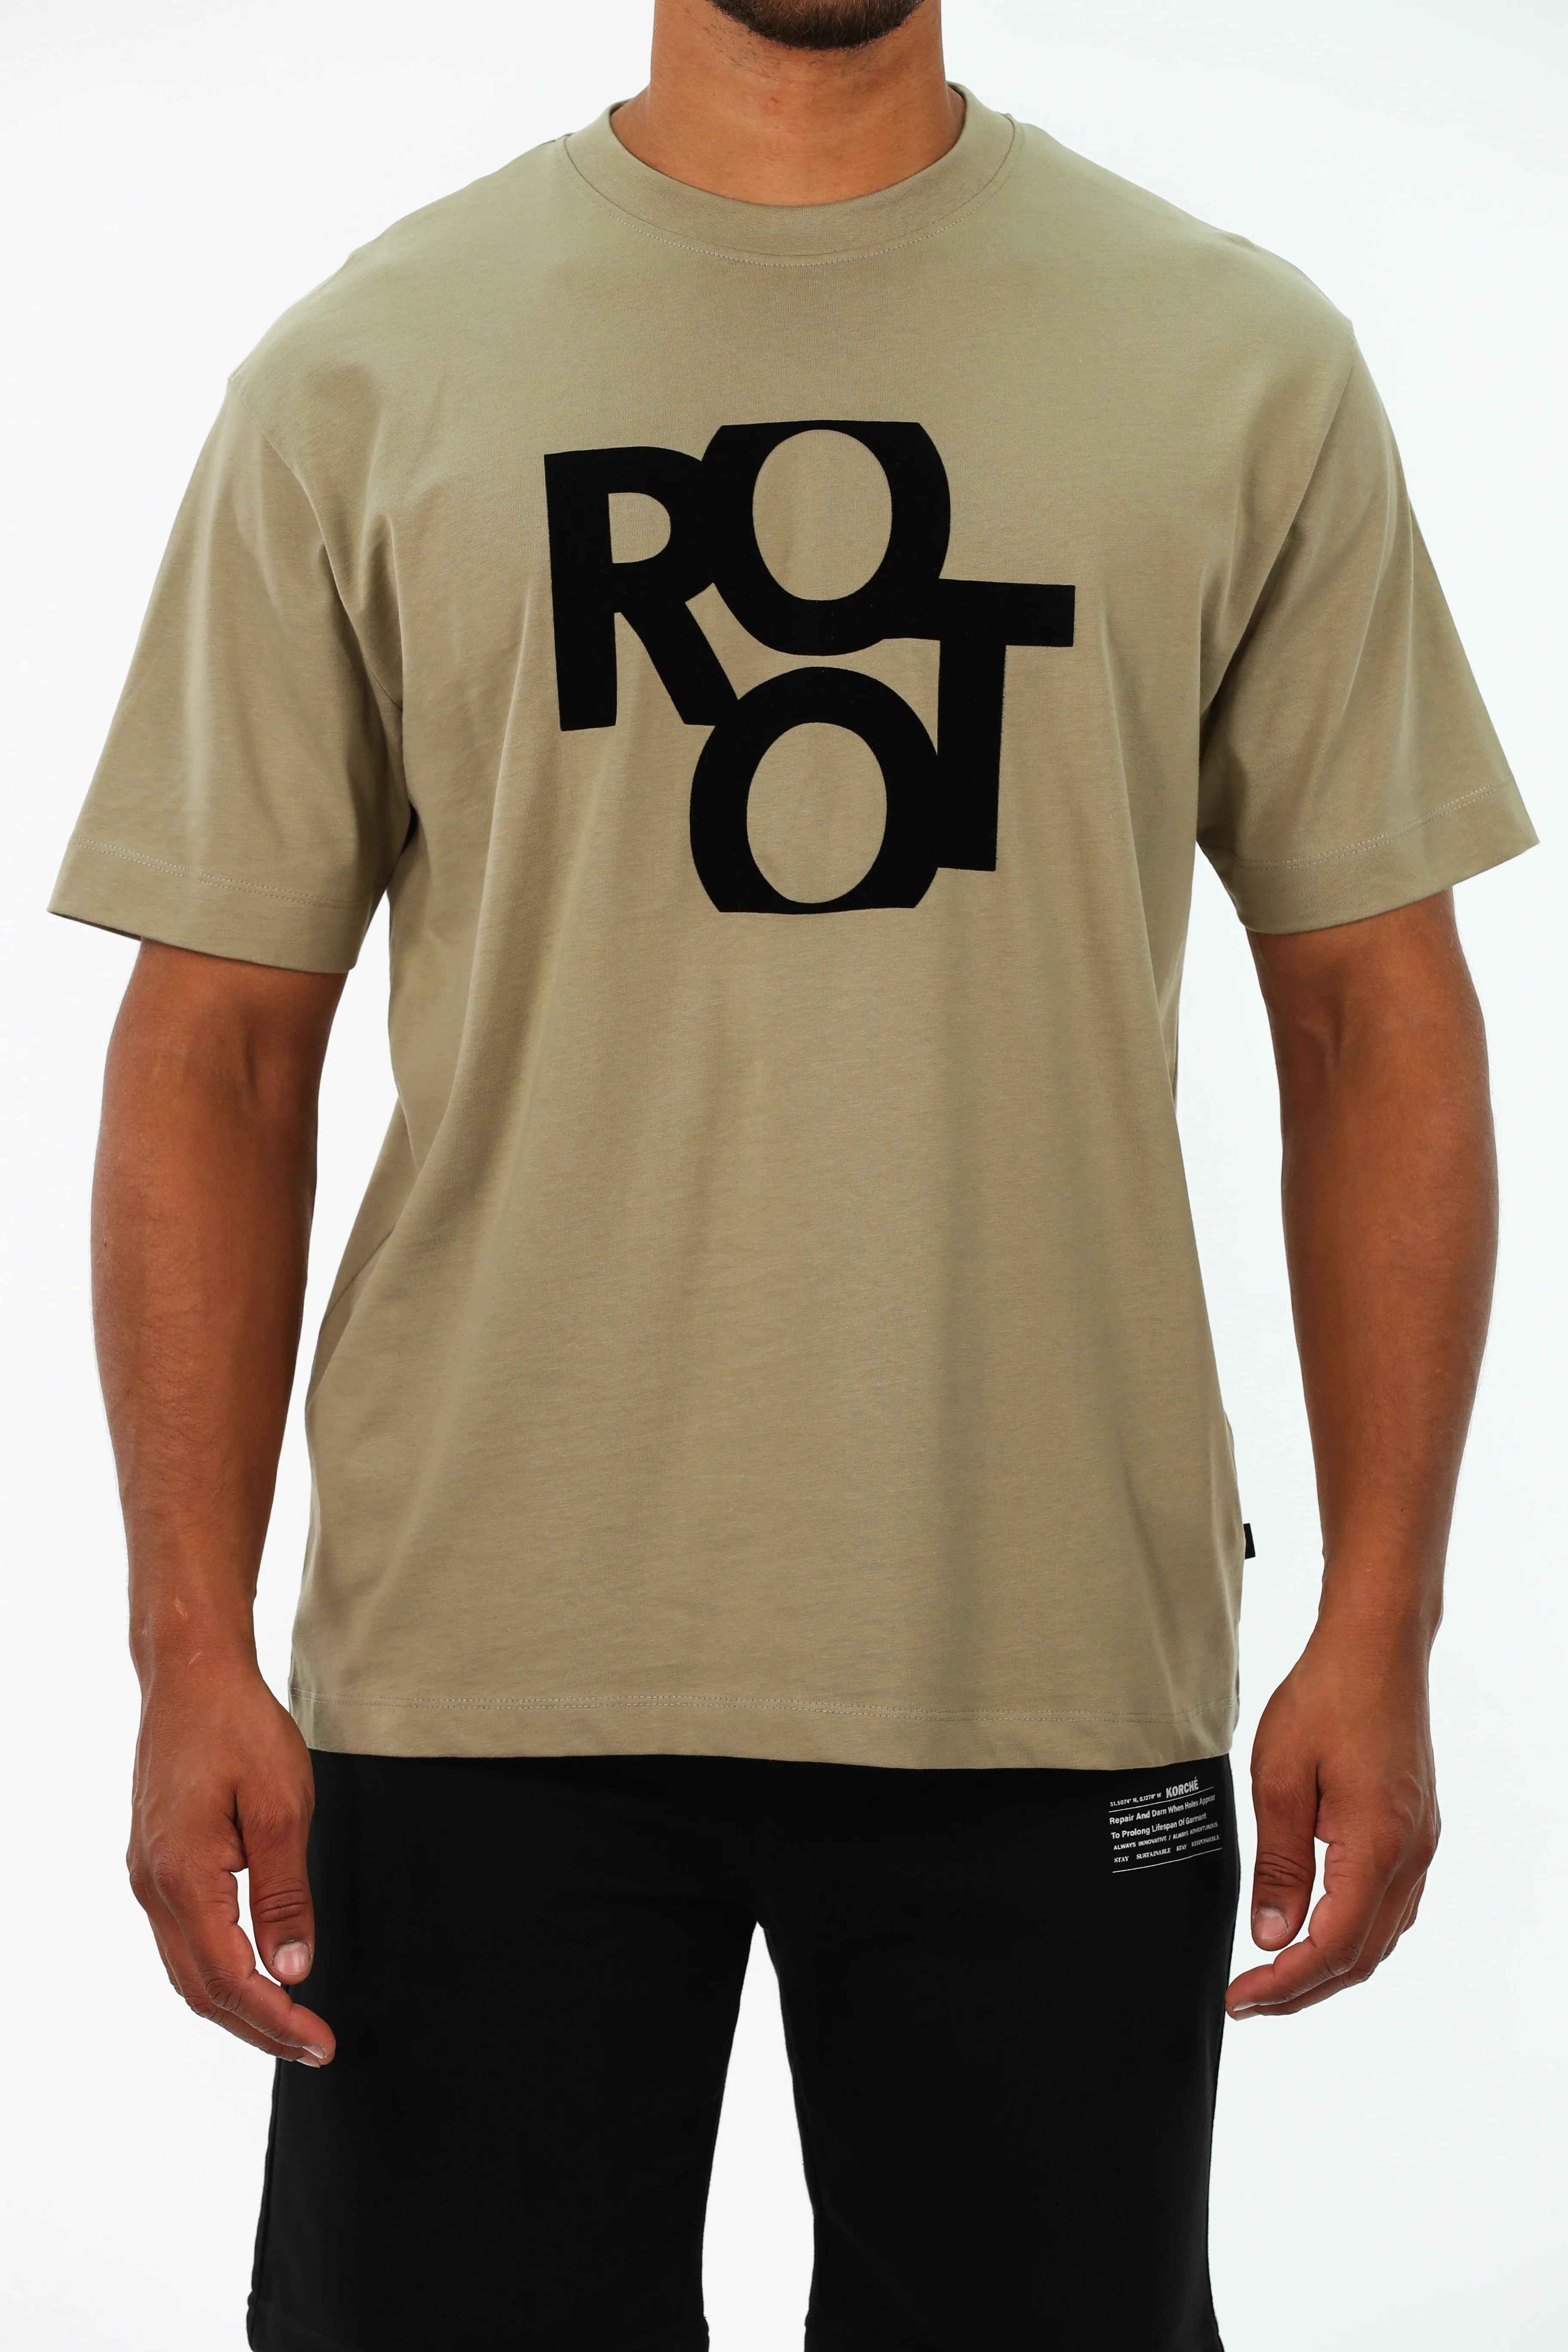 Oversized Light Khaki T-shirt With "Root" Front Design